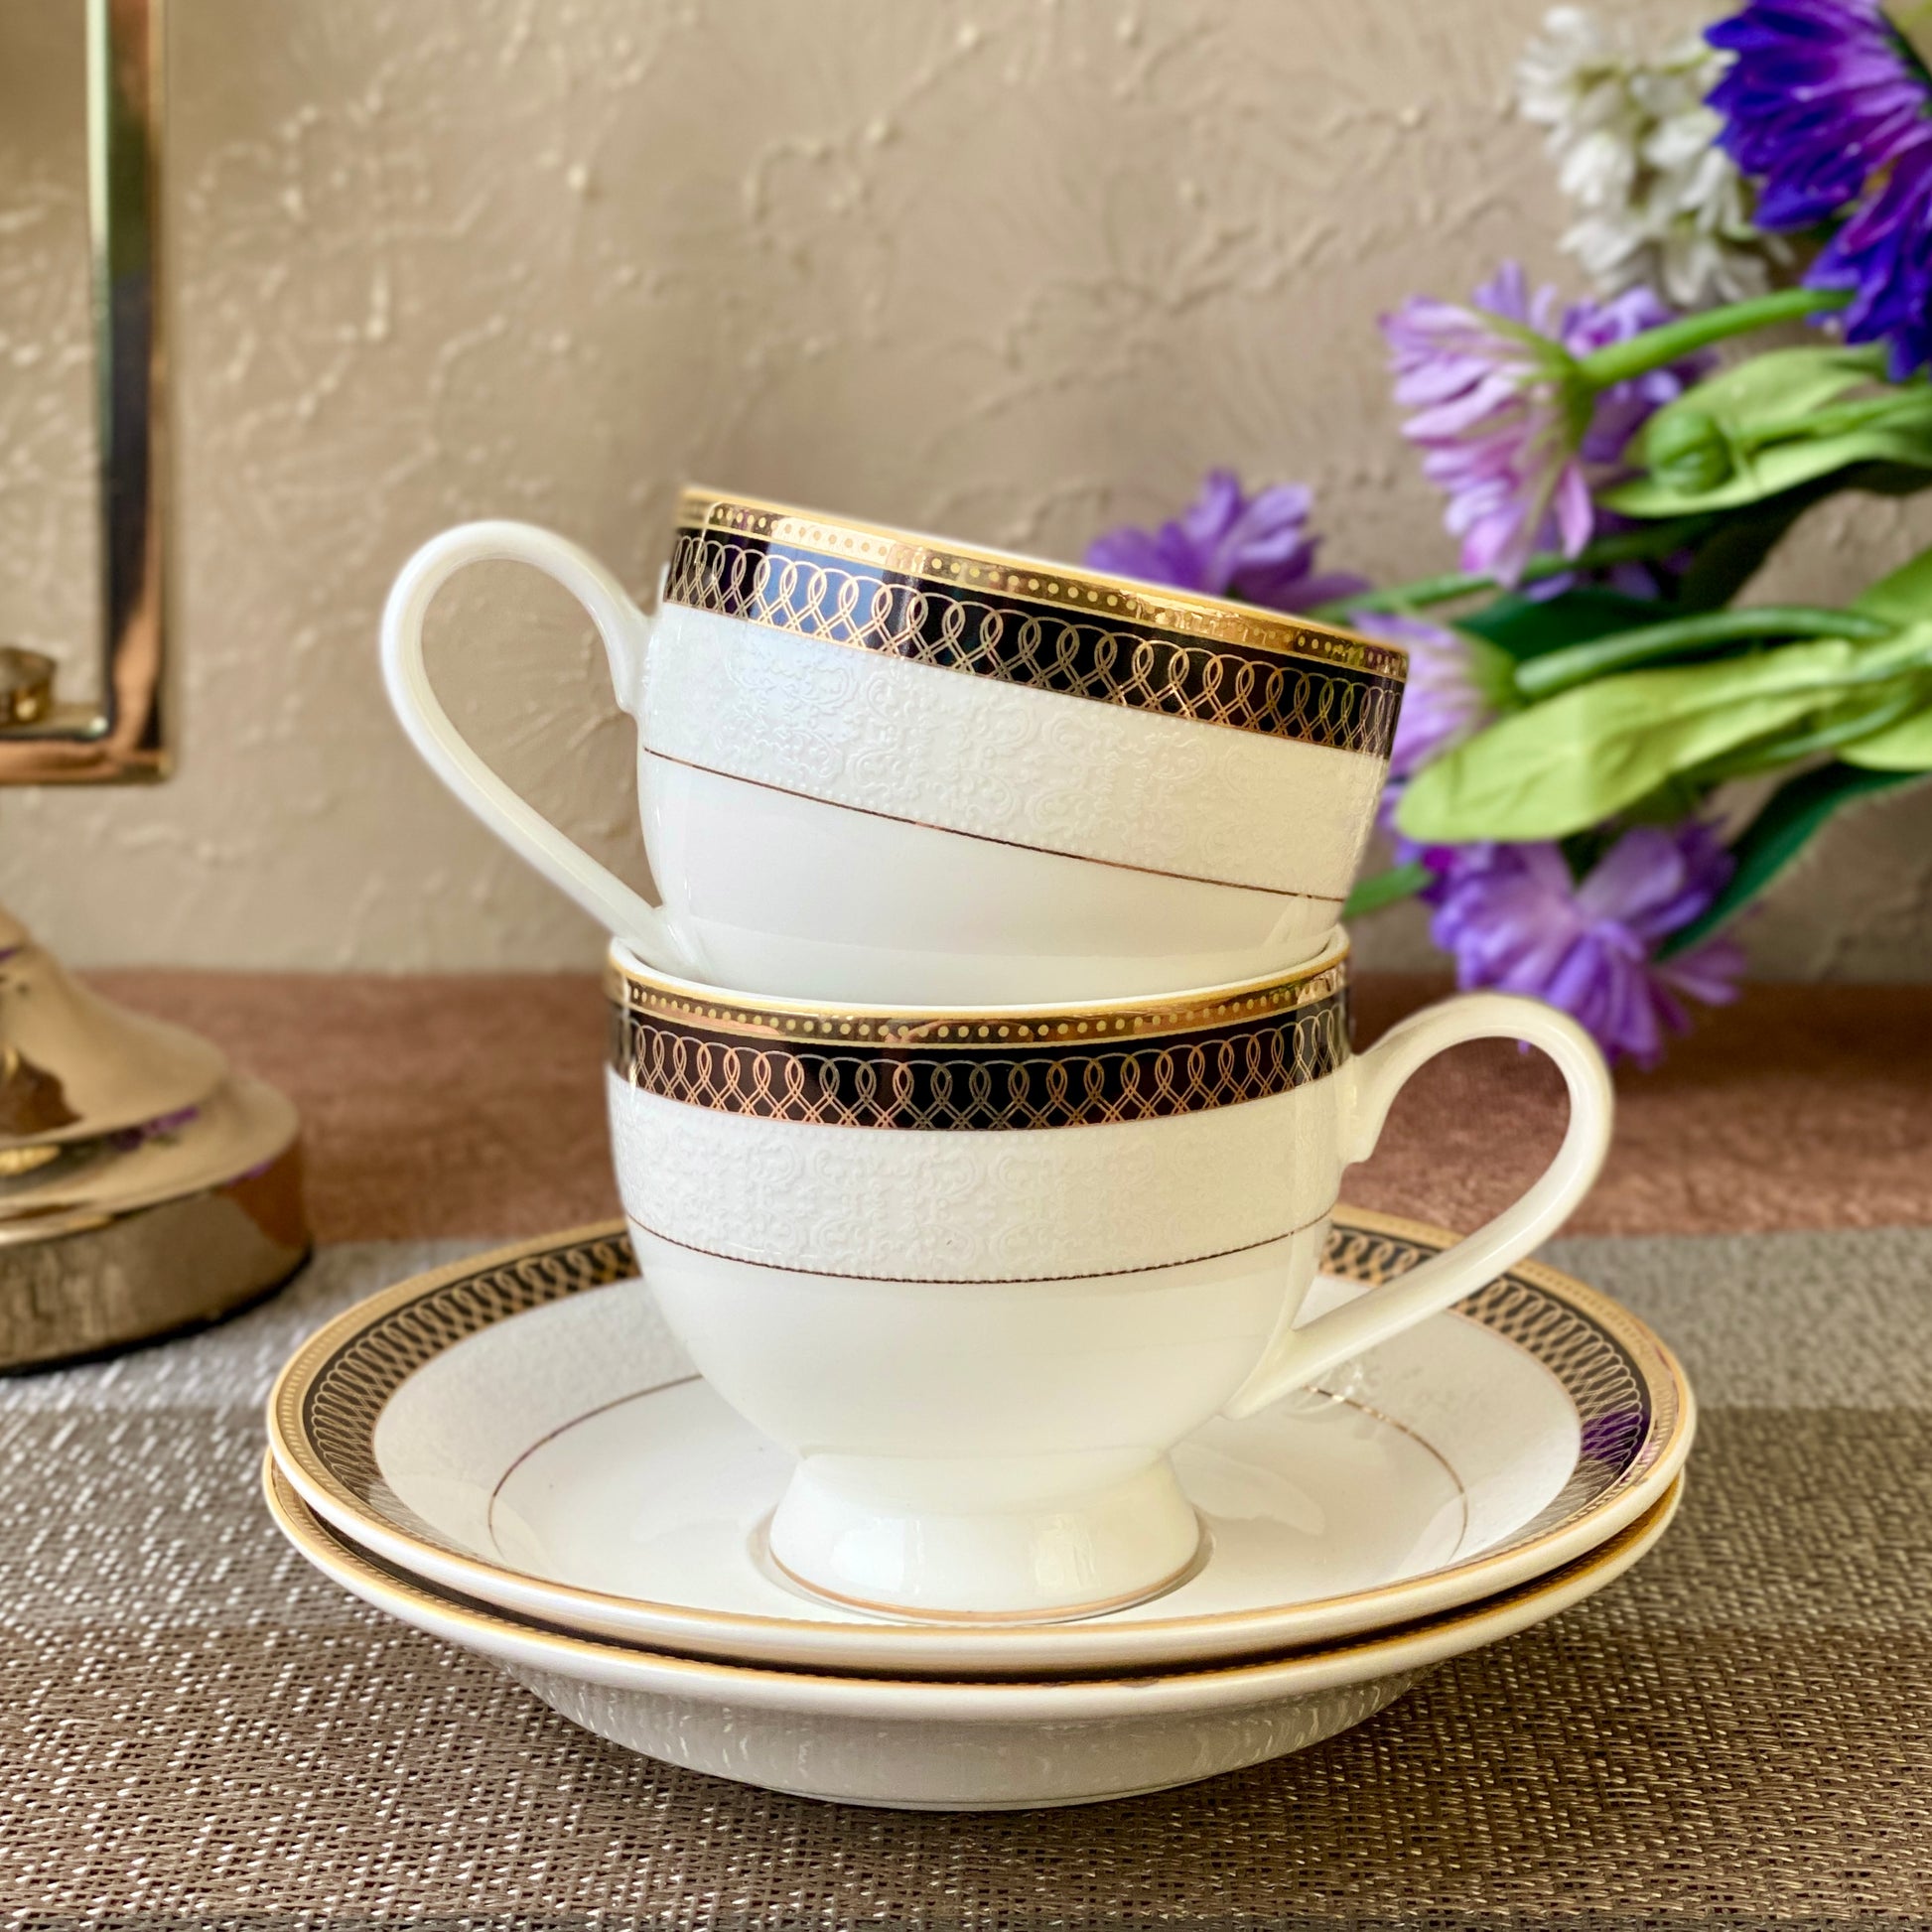 Gold on Black Cup and Saucer Set (6 Cups and 6 Saucers) - Vigneto